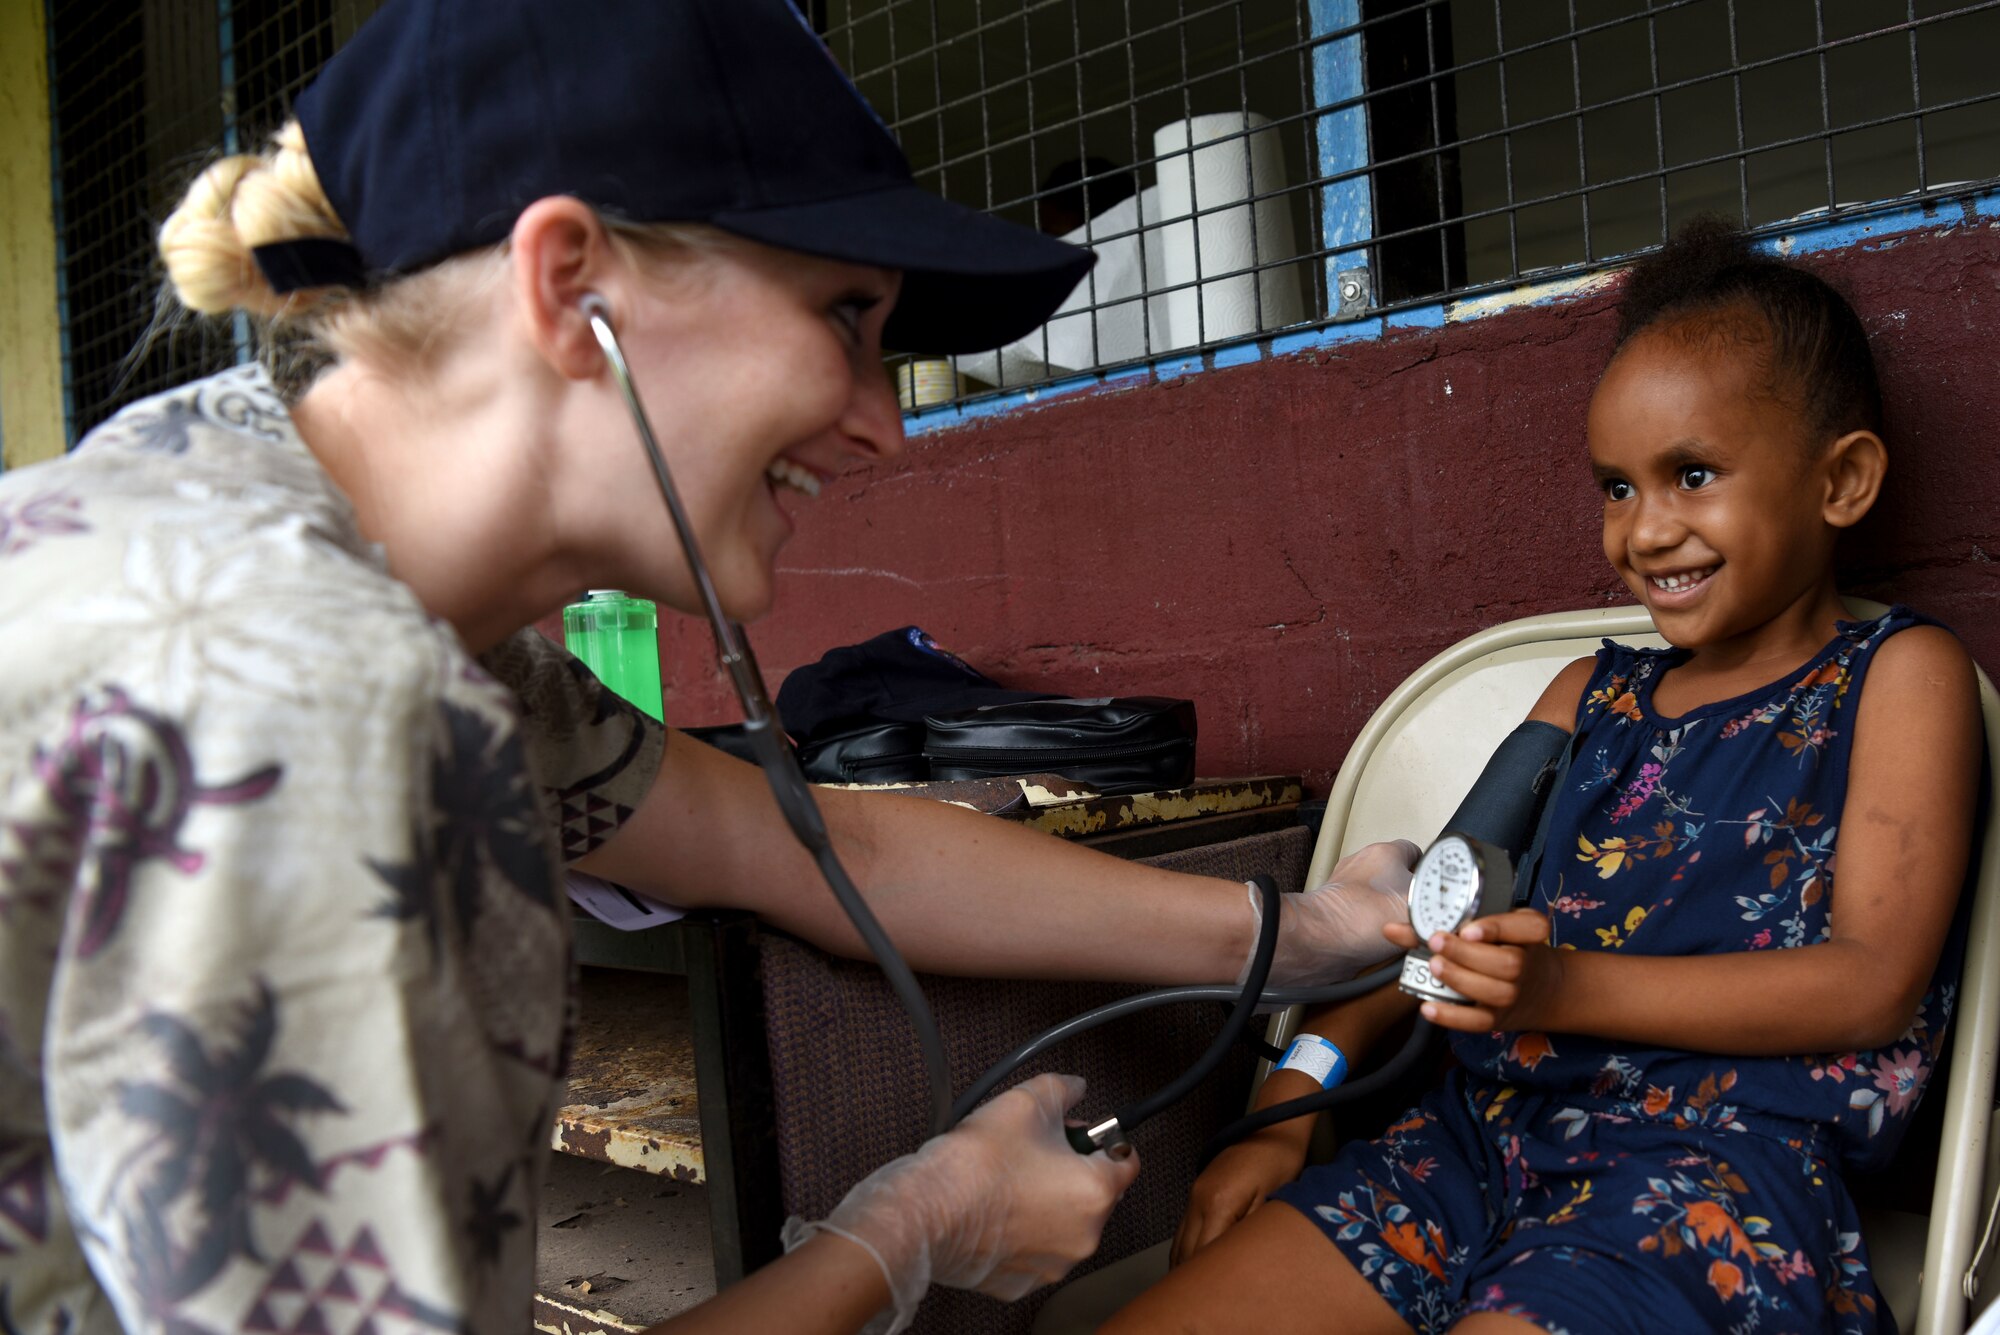 U.S. Air Force Staff Sgt. Kristen Hill, medical technician with the 152nd Medical Group, Nevada Air National Guard, checks a patient’s vitals at Tata Primary and Secondary School during Pacific Angel 18-3 in Luganville, Espiritu Santo Island, Vanuatu, July 16, 2018.